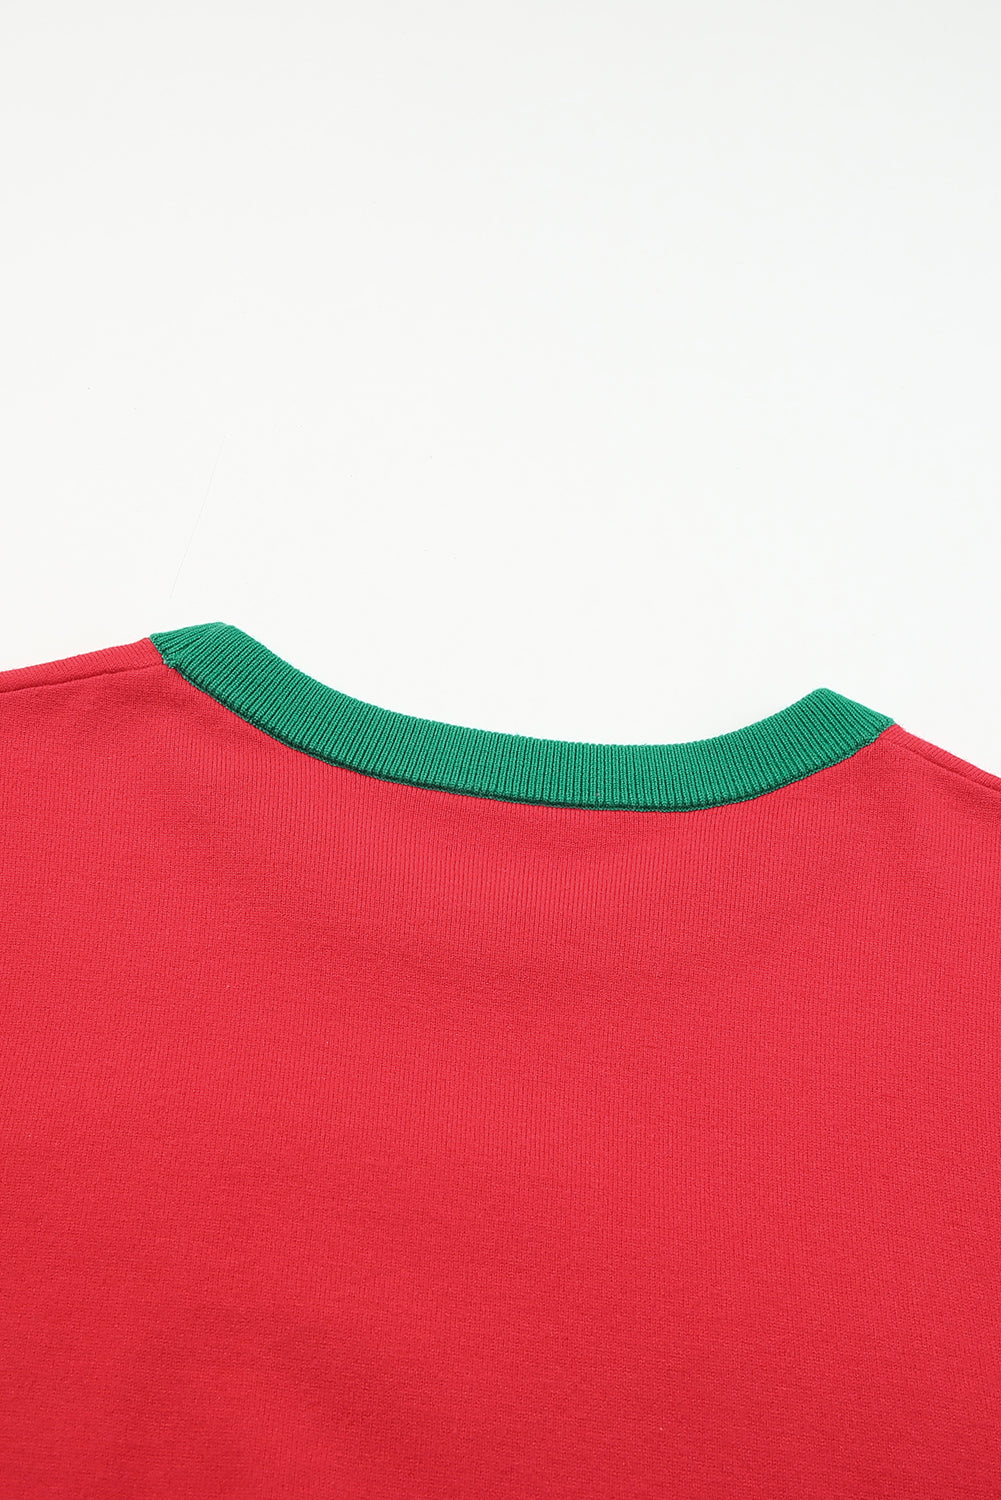 Fiery Red Tinsel Merry & Bright Graphic Contrast Trim Sweater